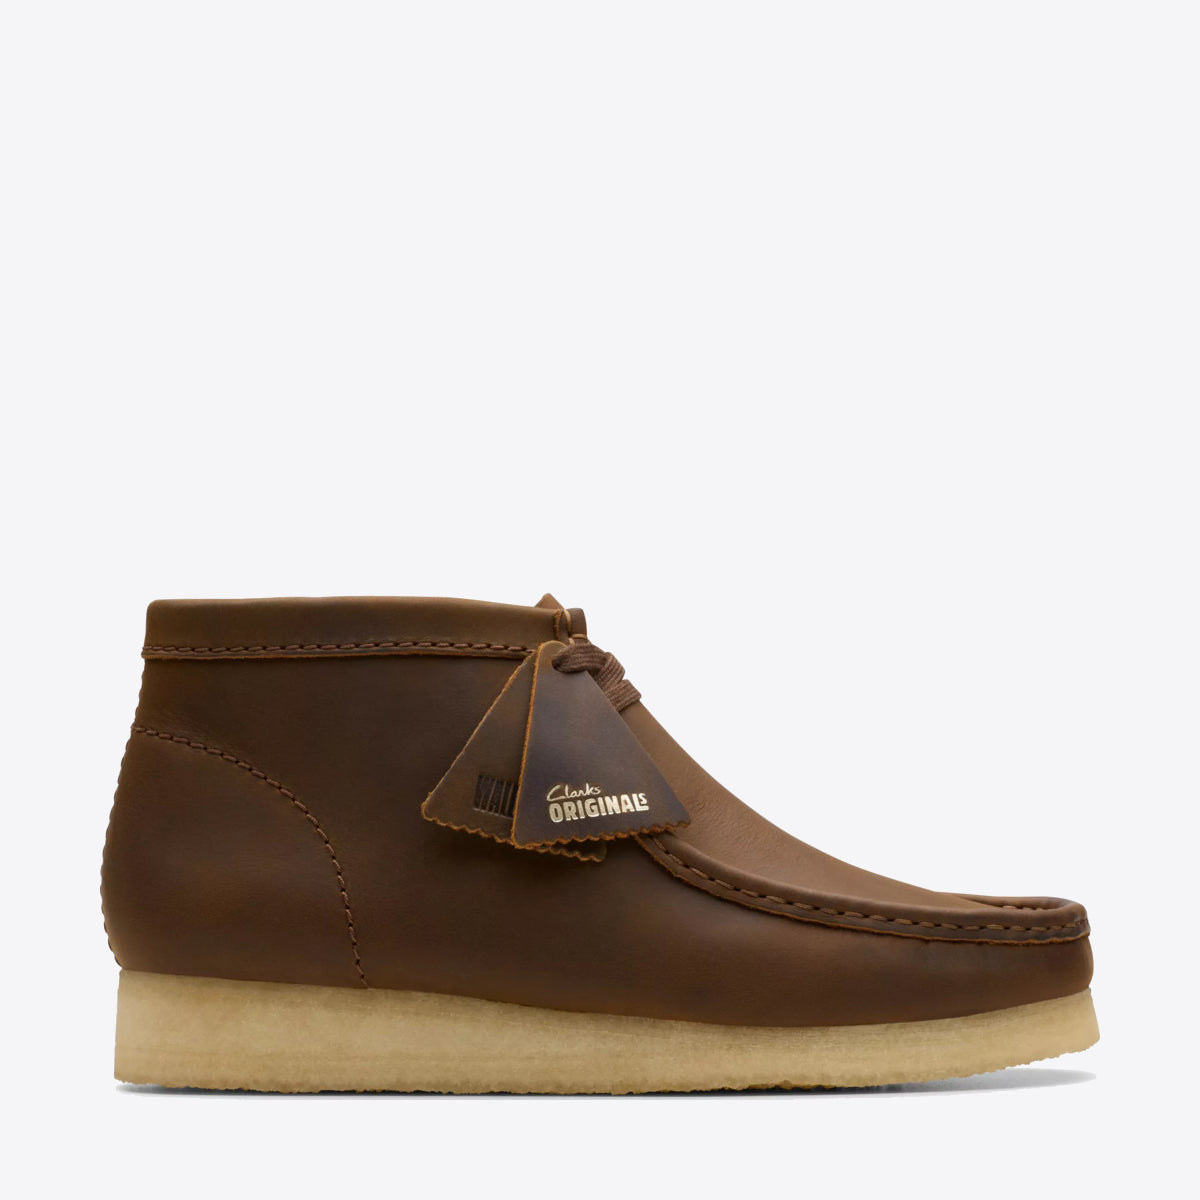 CLARKS Wallabee Boot Leather Beeswax - Image 1